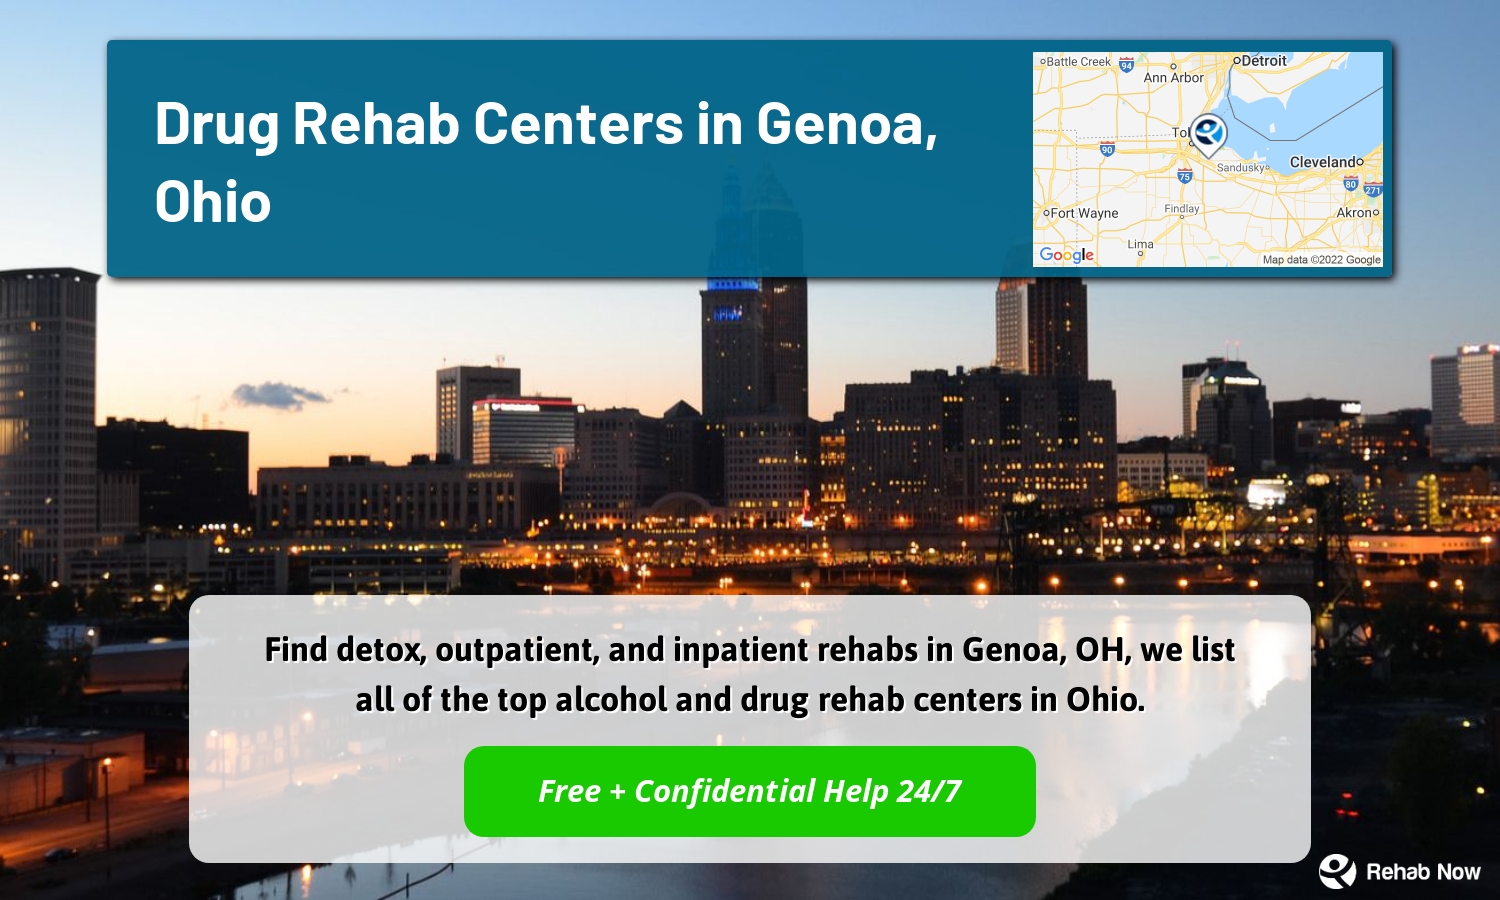 Find detox, outpatient, and inpatient rehabs in Genoa, OH, we list all of the top alcohol and drug rehab centers in Ohio.